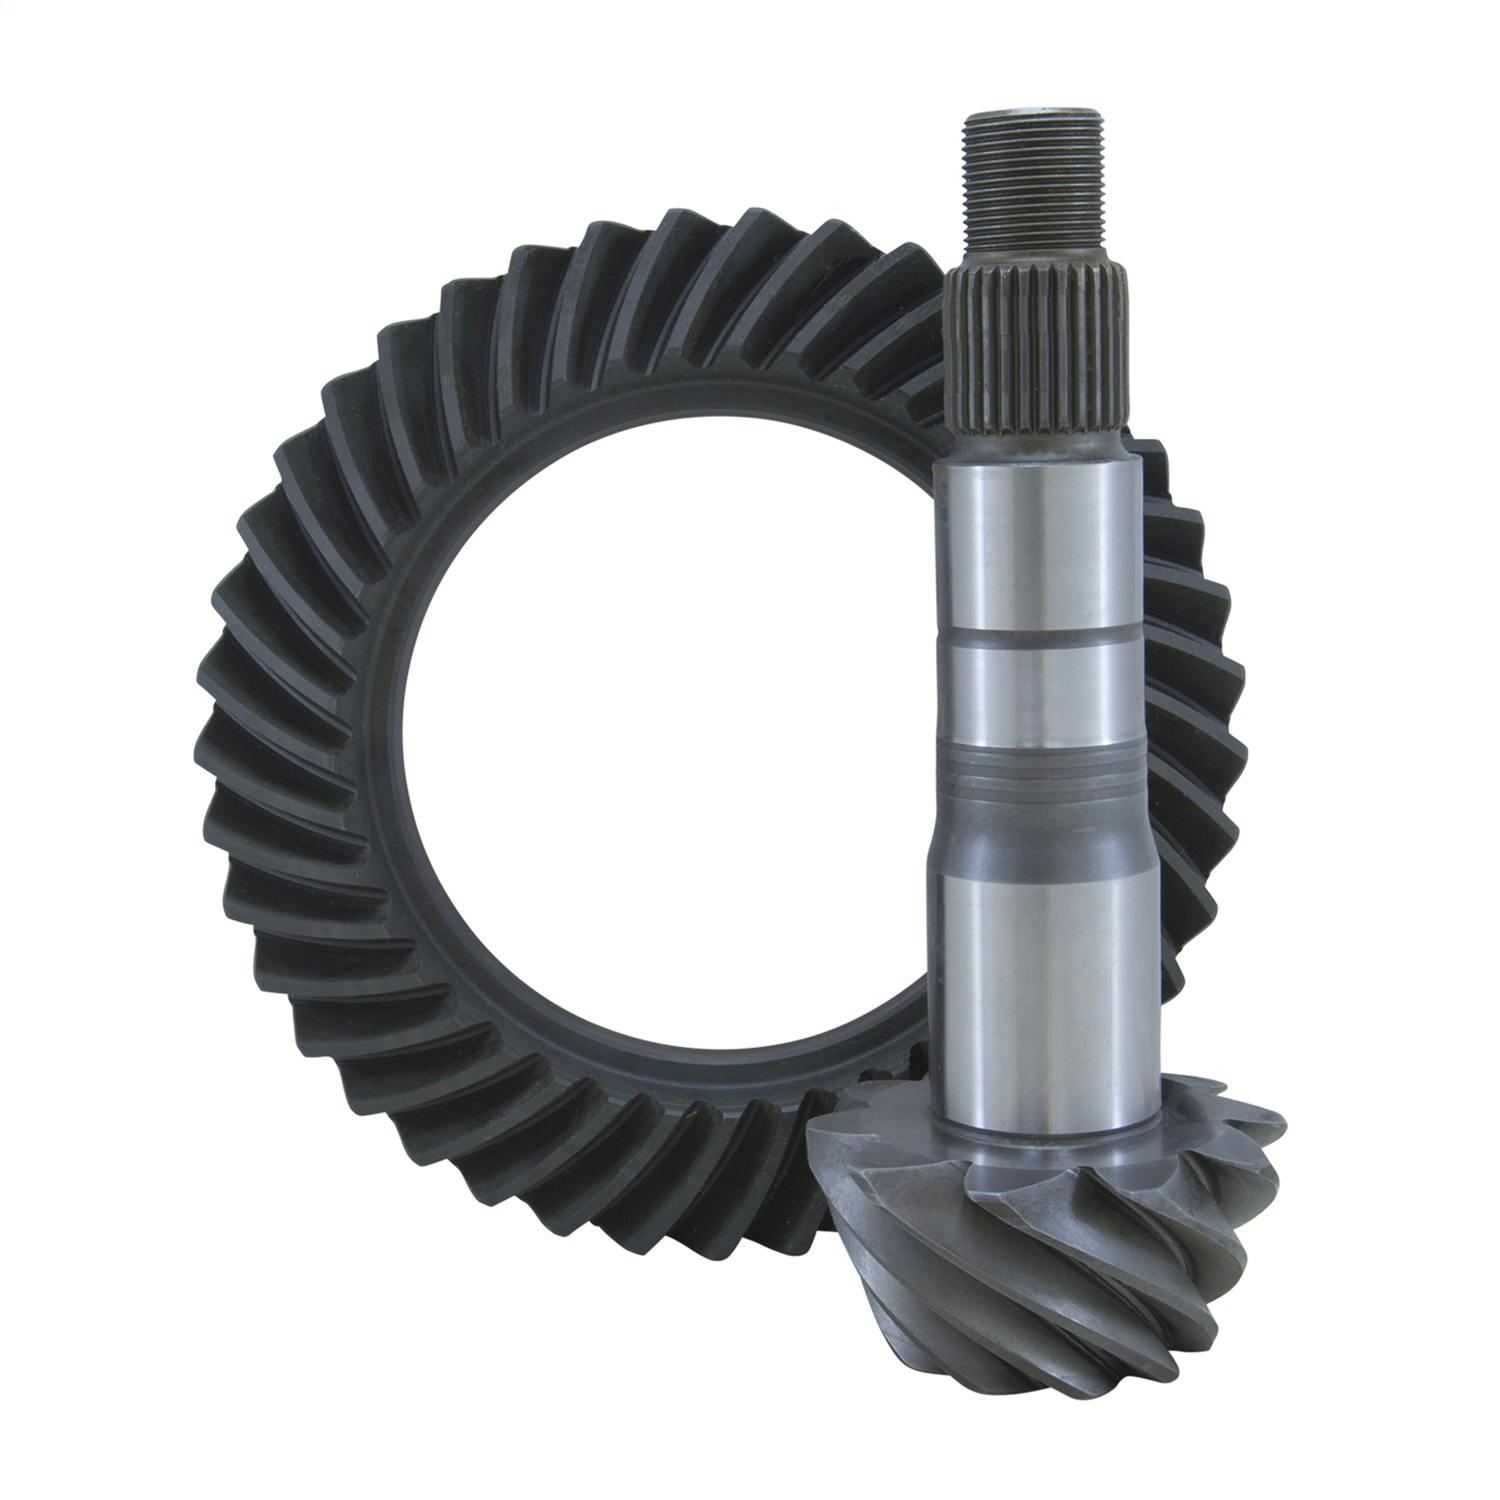 USA Standard Gear ZG T100-529 Ring And Pinion